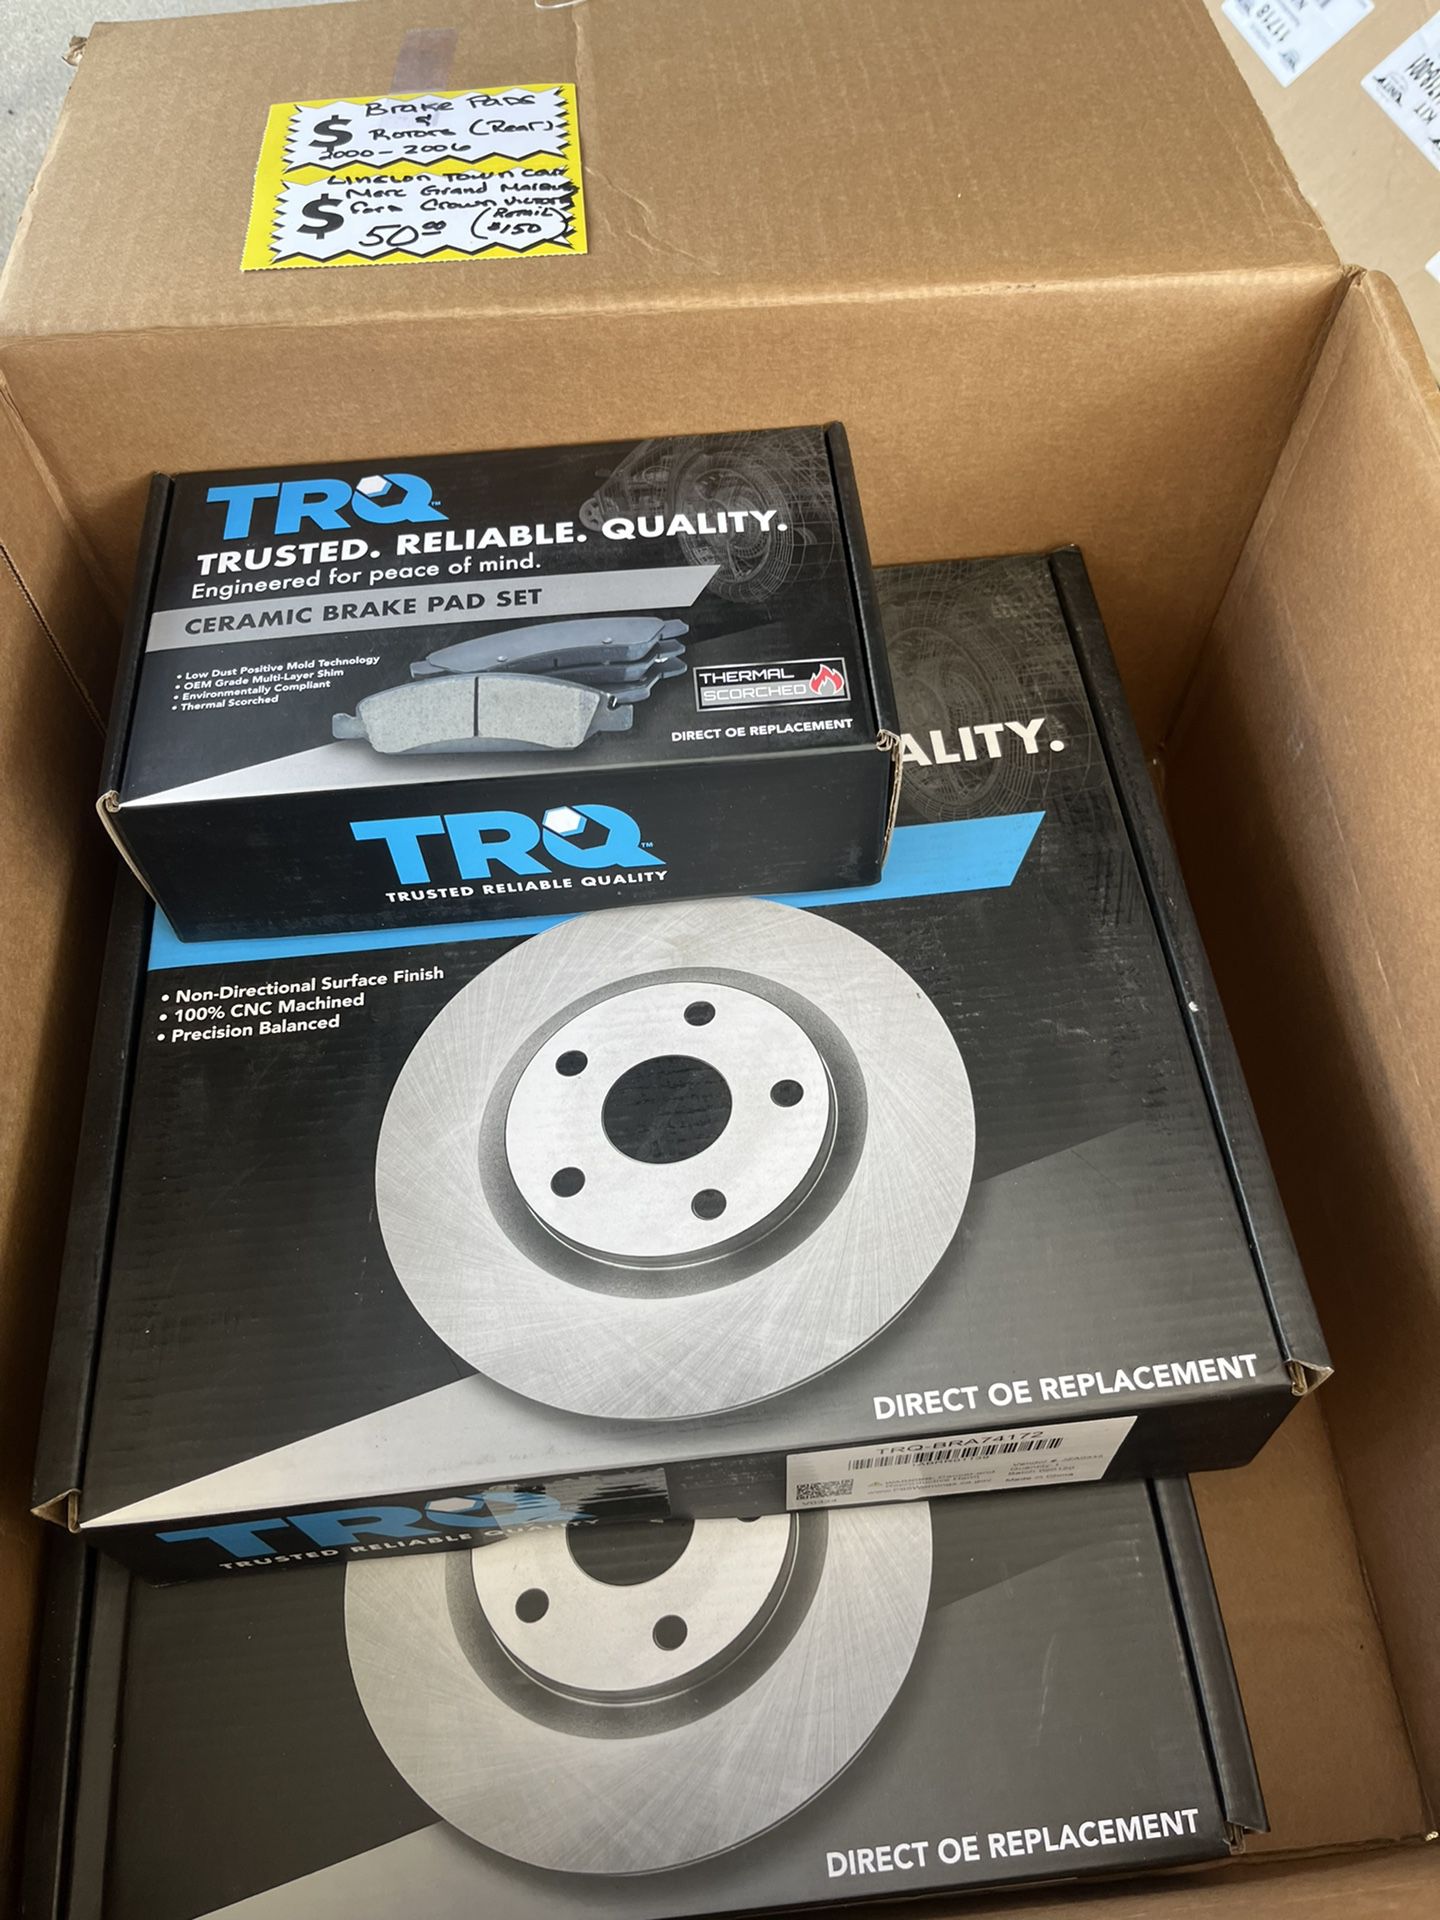 Full Size Ford Rear Brakes Pads And Rotors